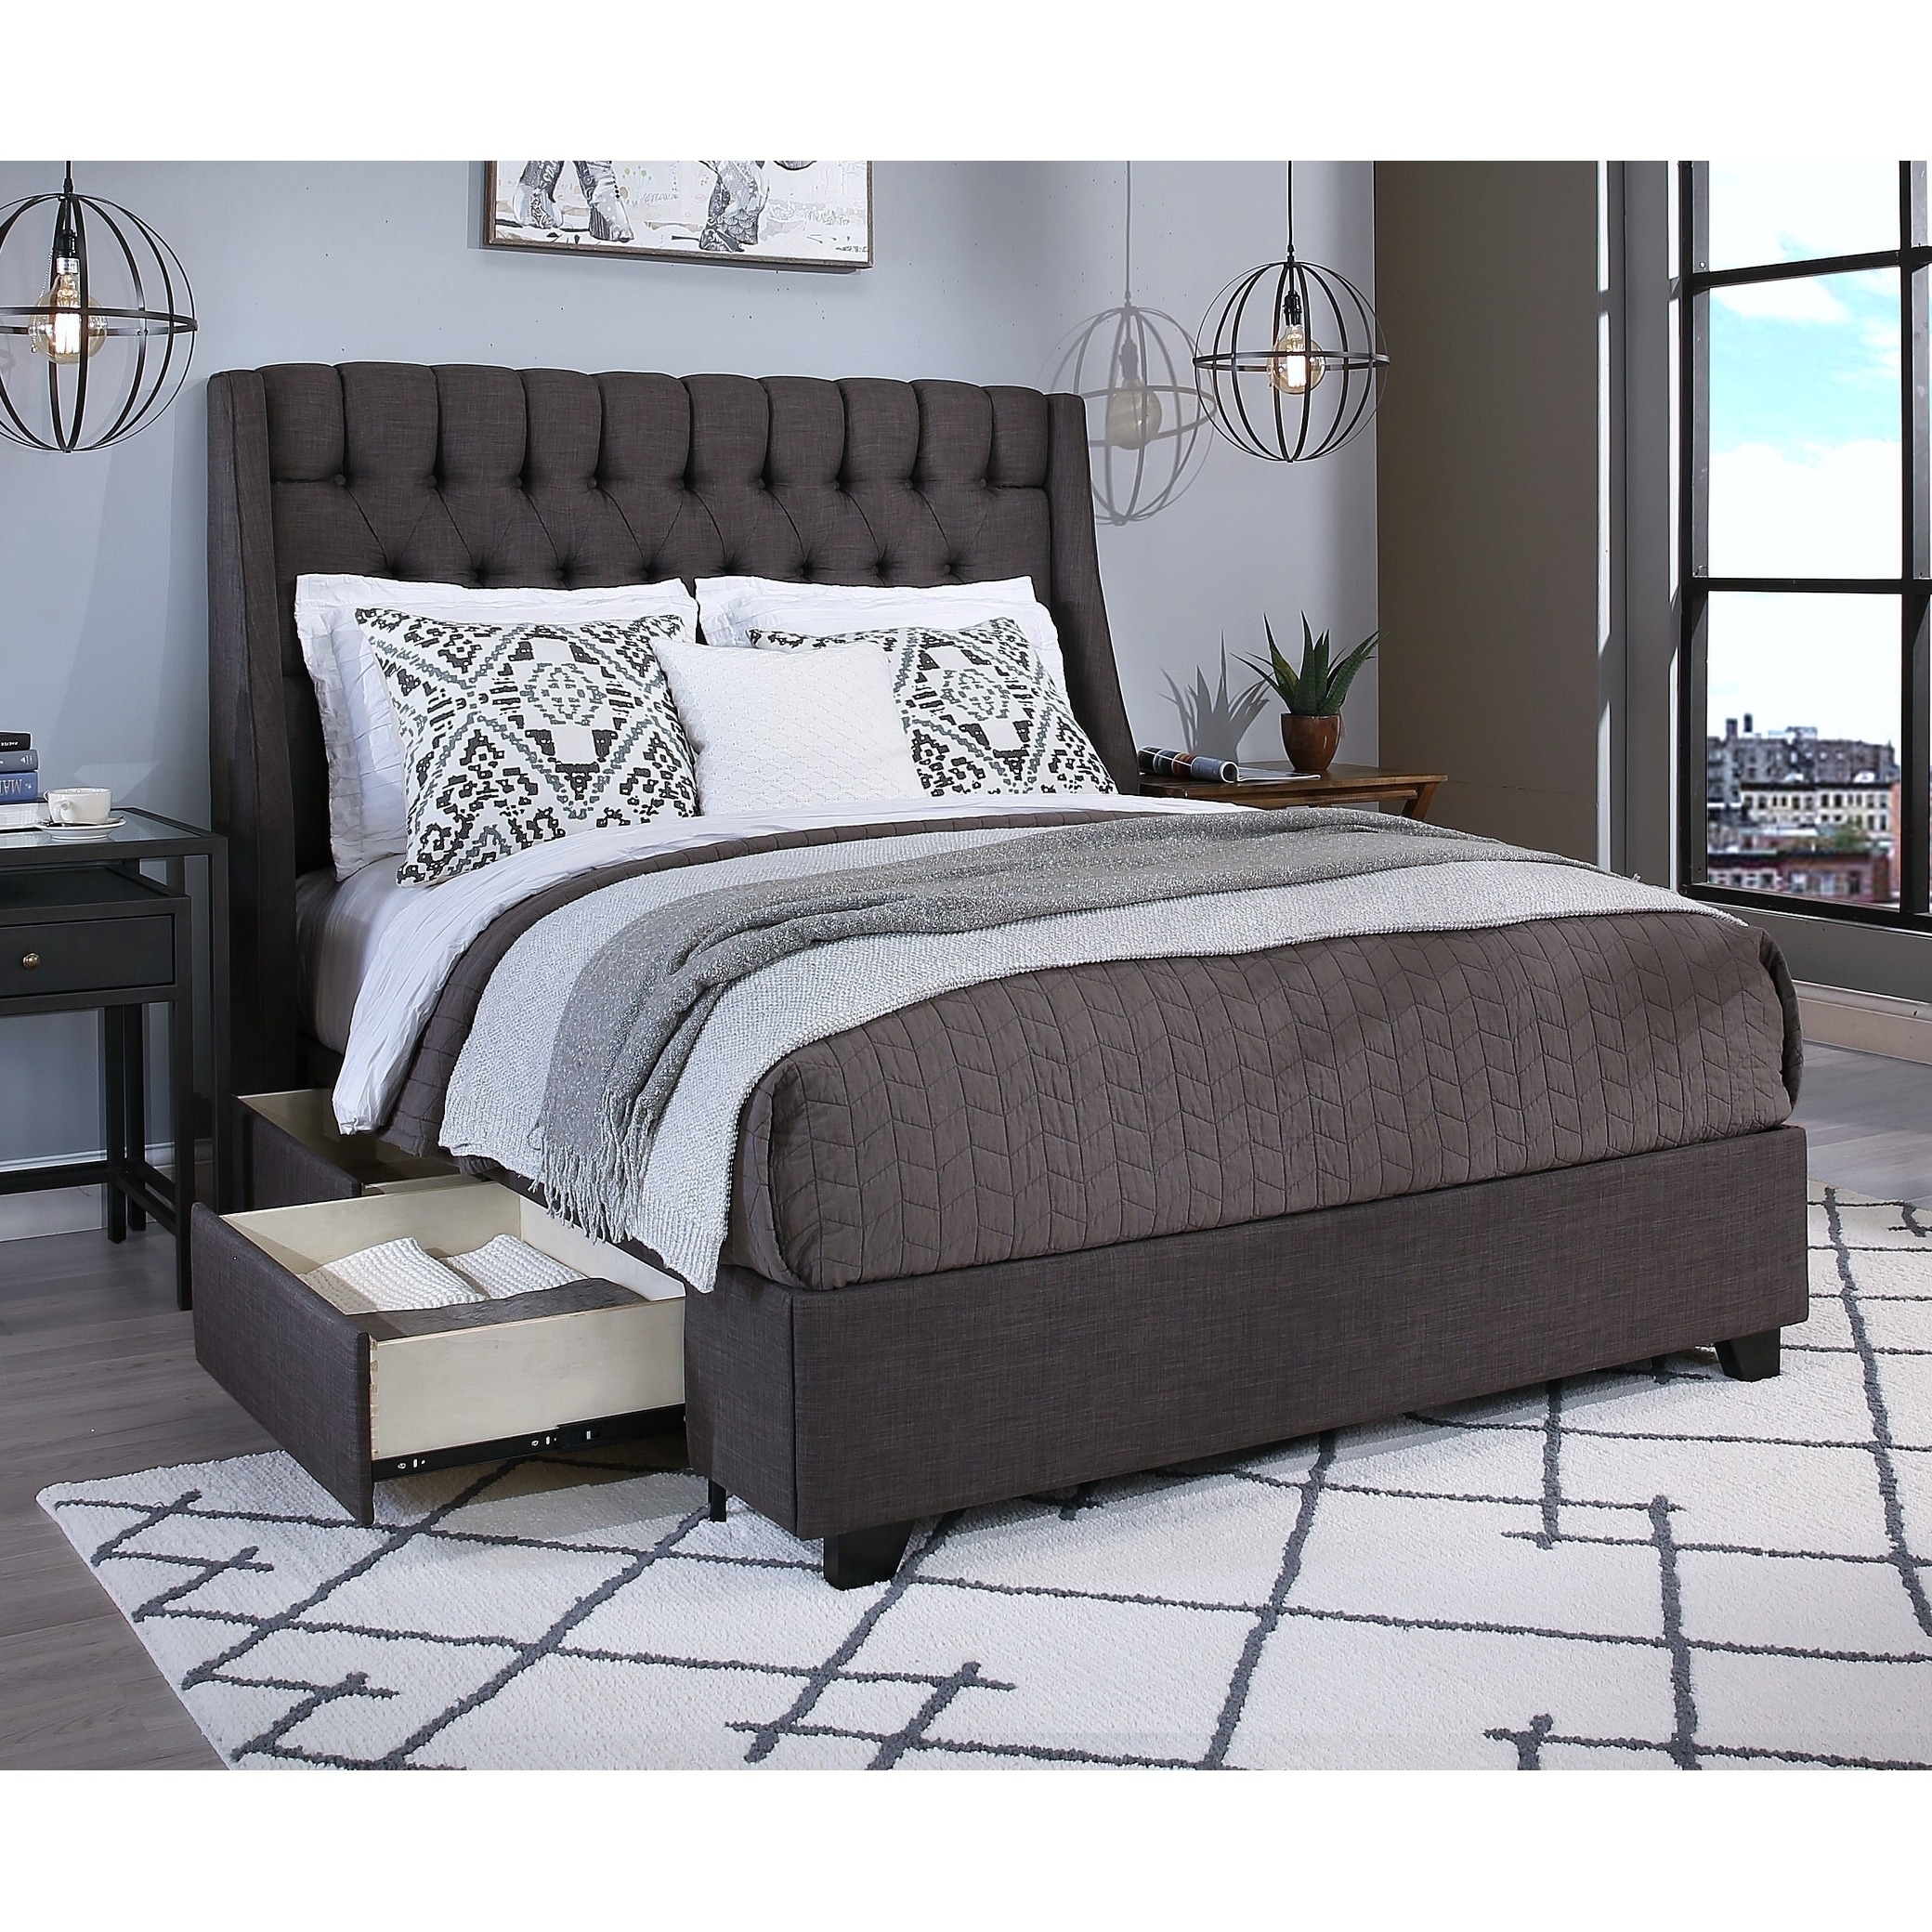 Cambridge Upholstered Tufted Wingback Storage Bed Overstock 21669493 California King Grey